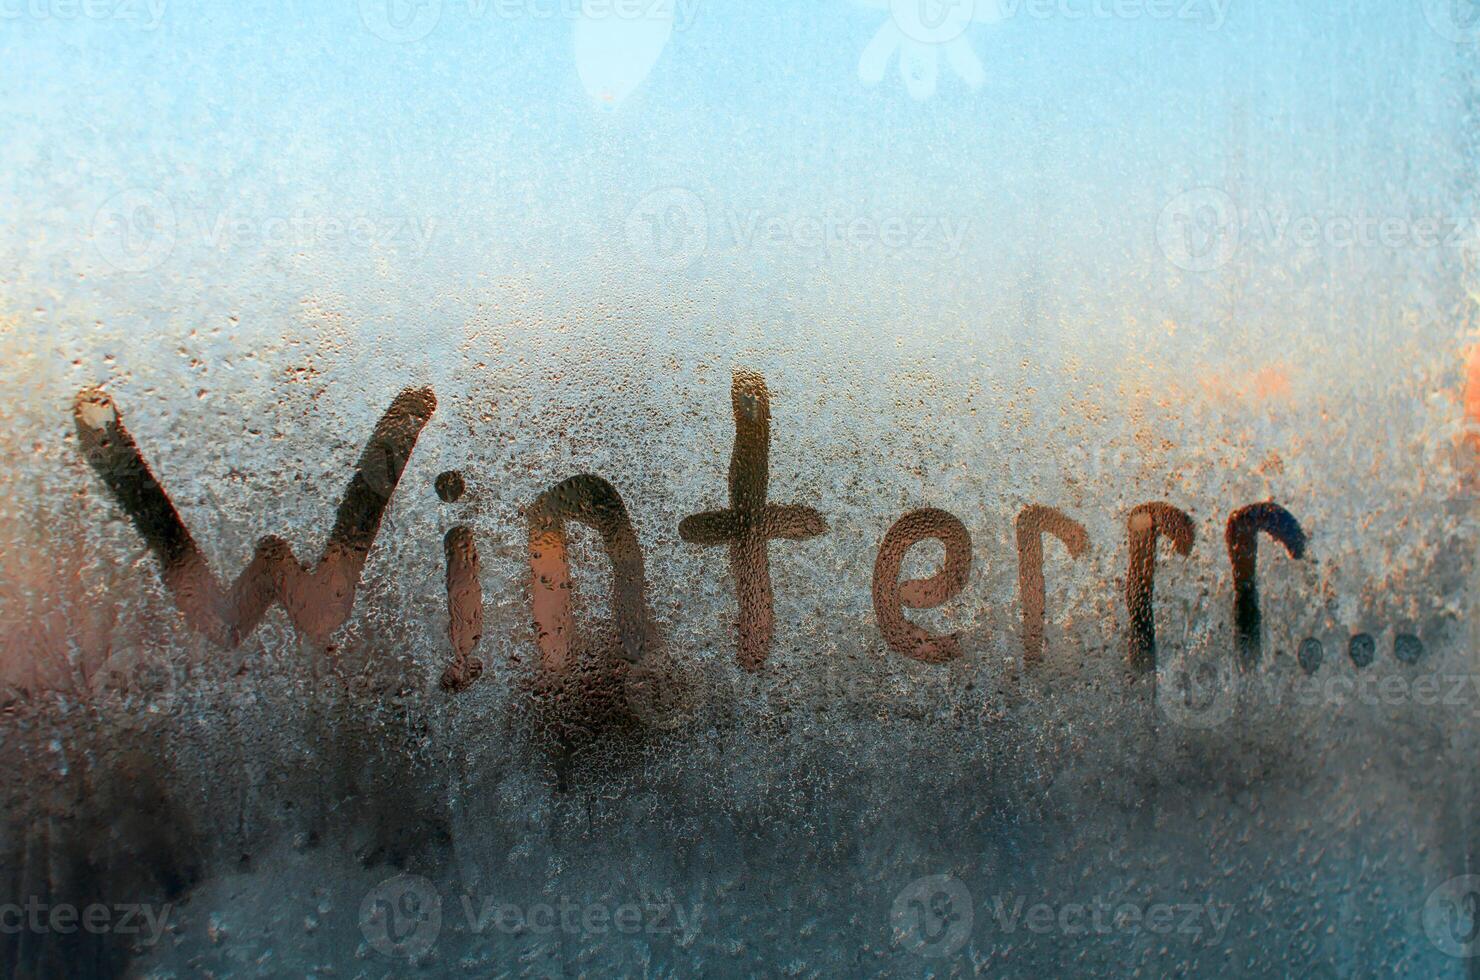 Winter frozen window. Creative spelling of the word Winter, means cold and freezing. Frosty pattern on glass, sunny morning. photo